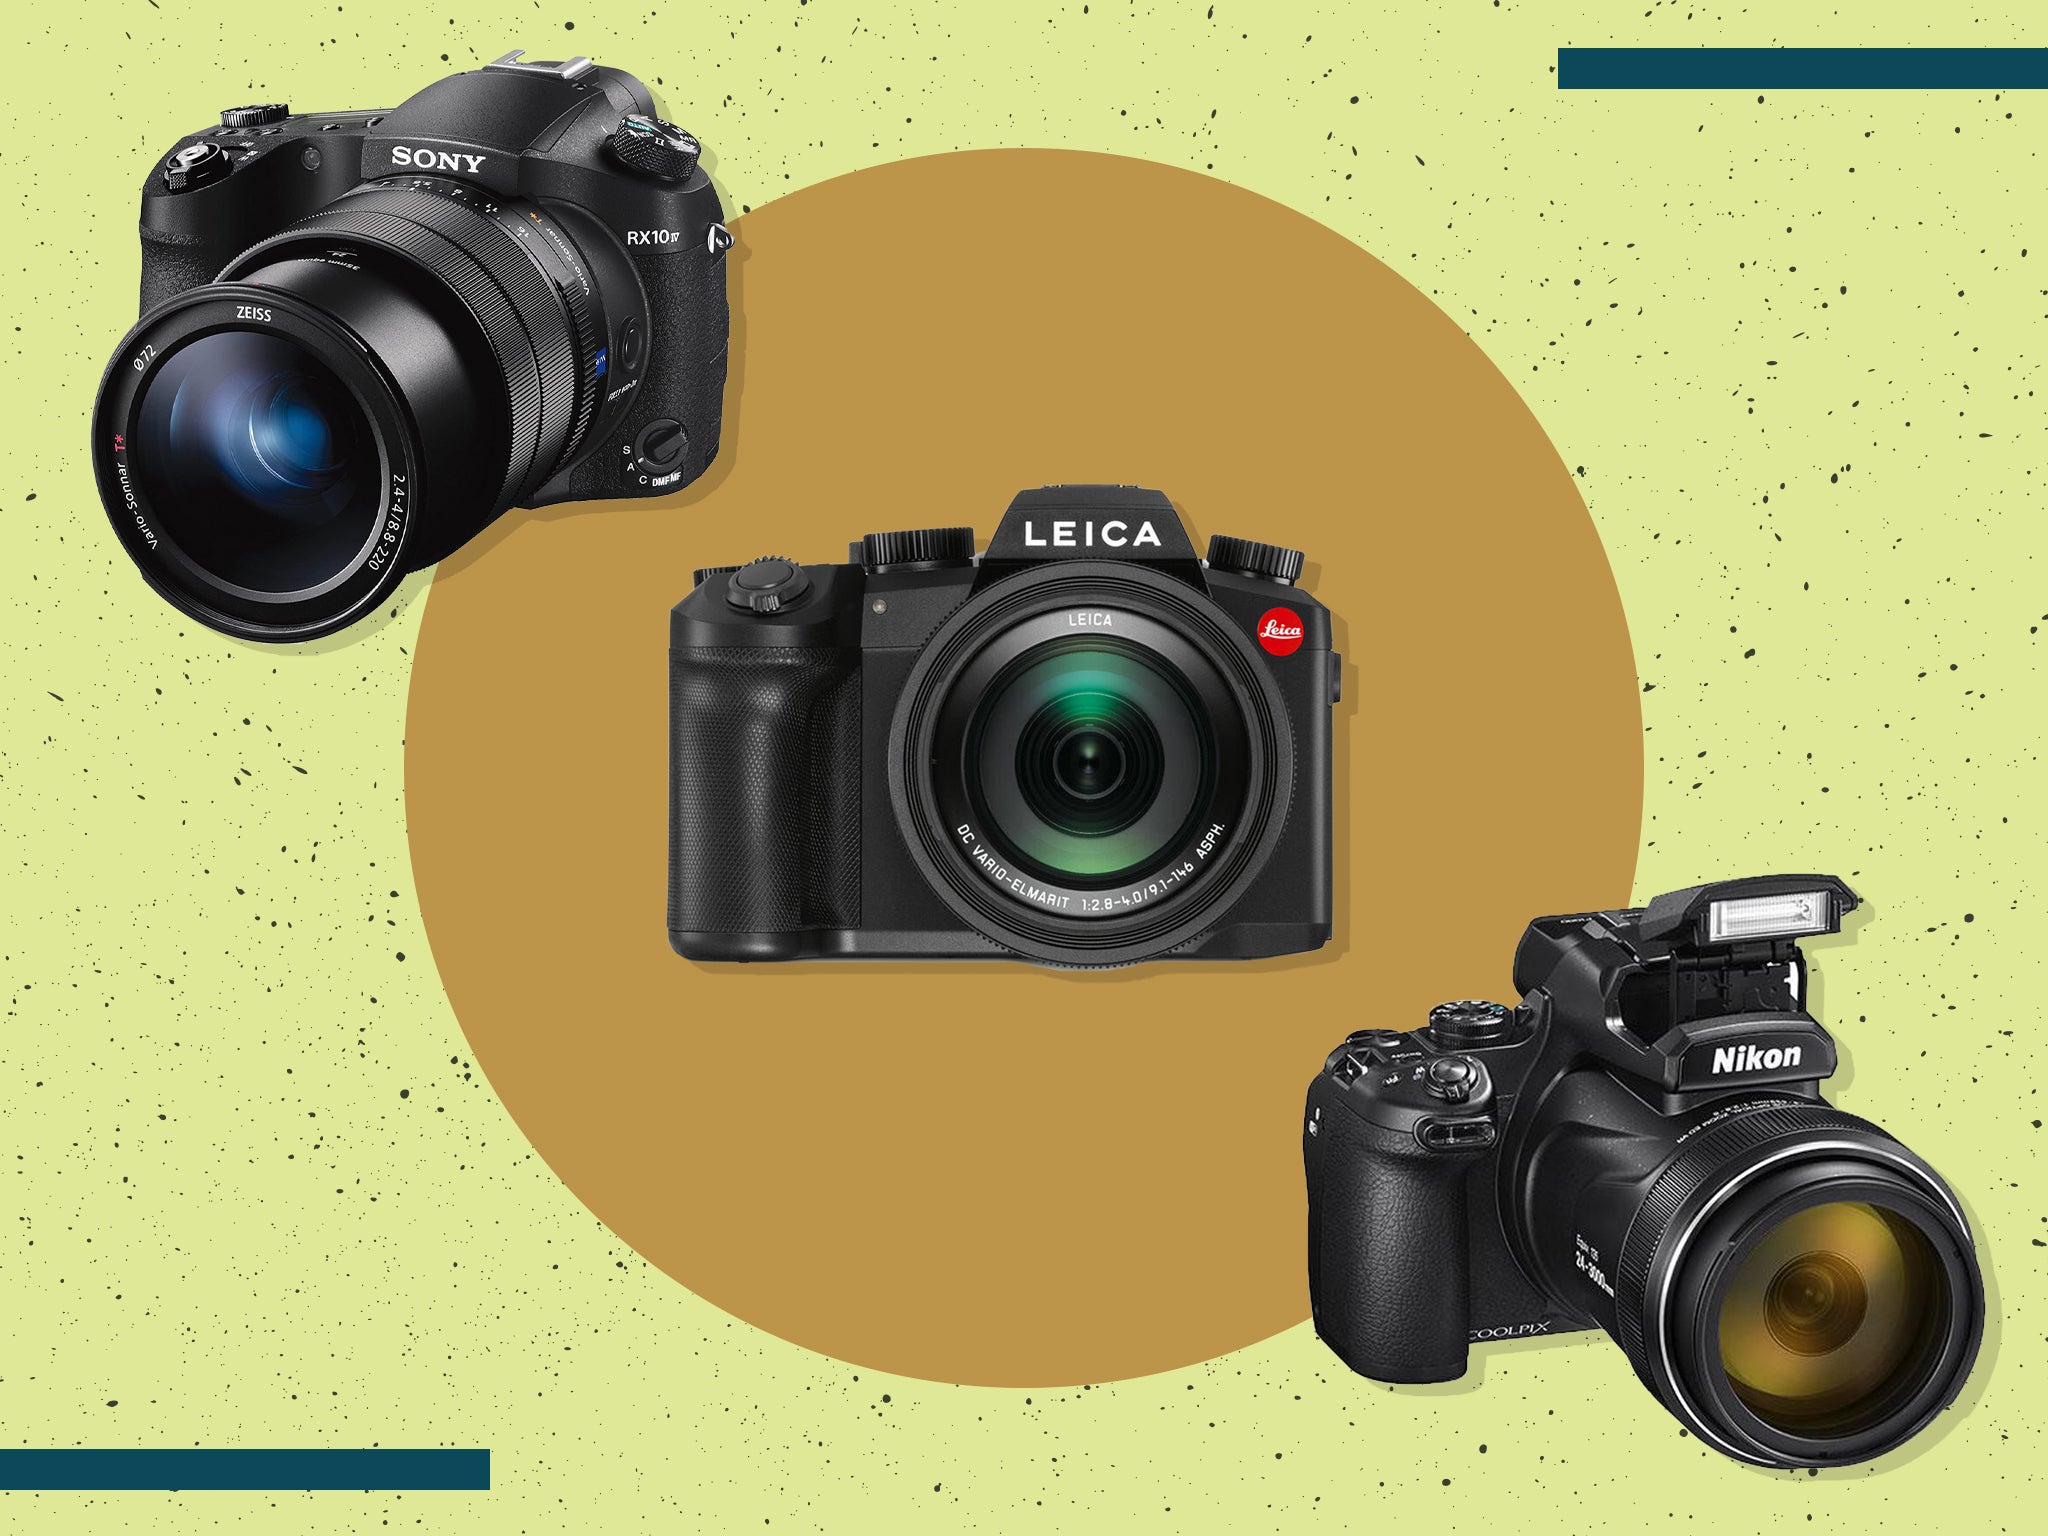 Technological improvements have made bridge cameras a viable alternative to standard, more professional and often more complicated DSLR options